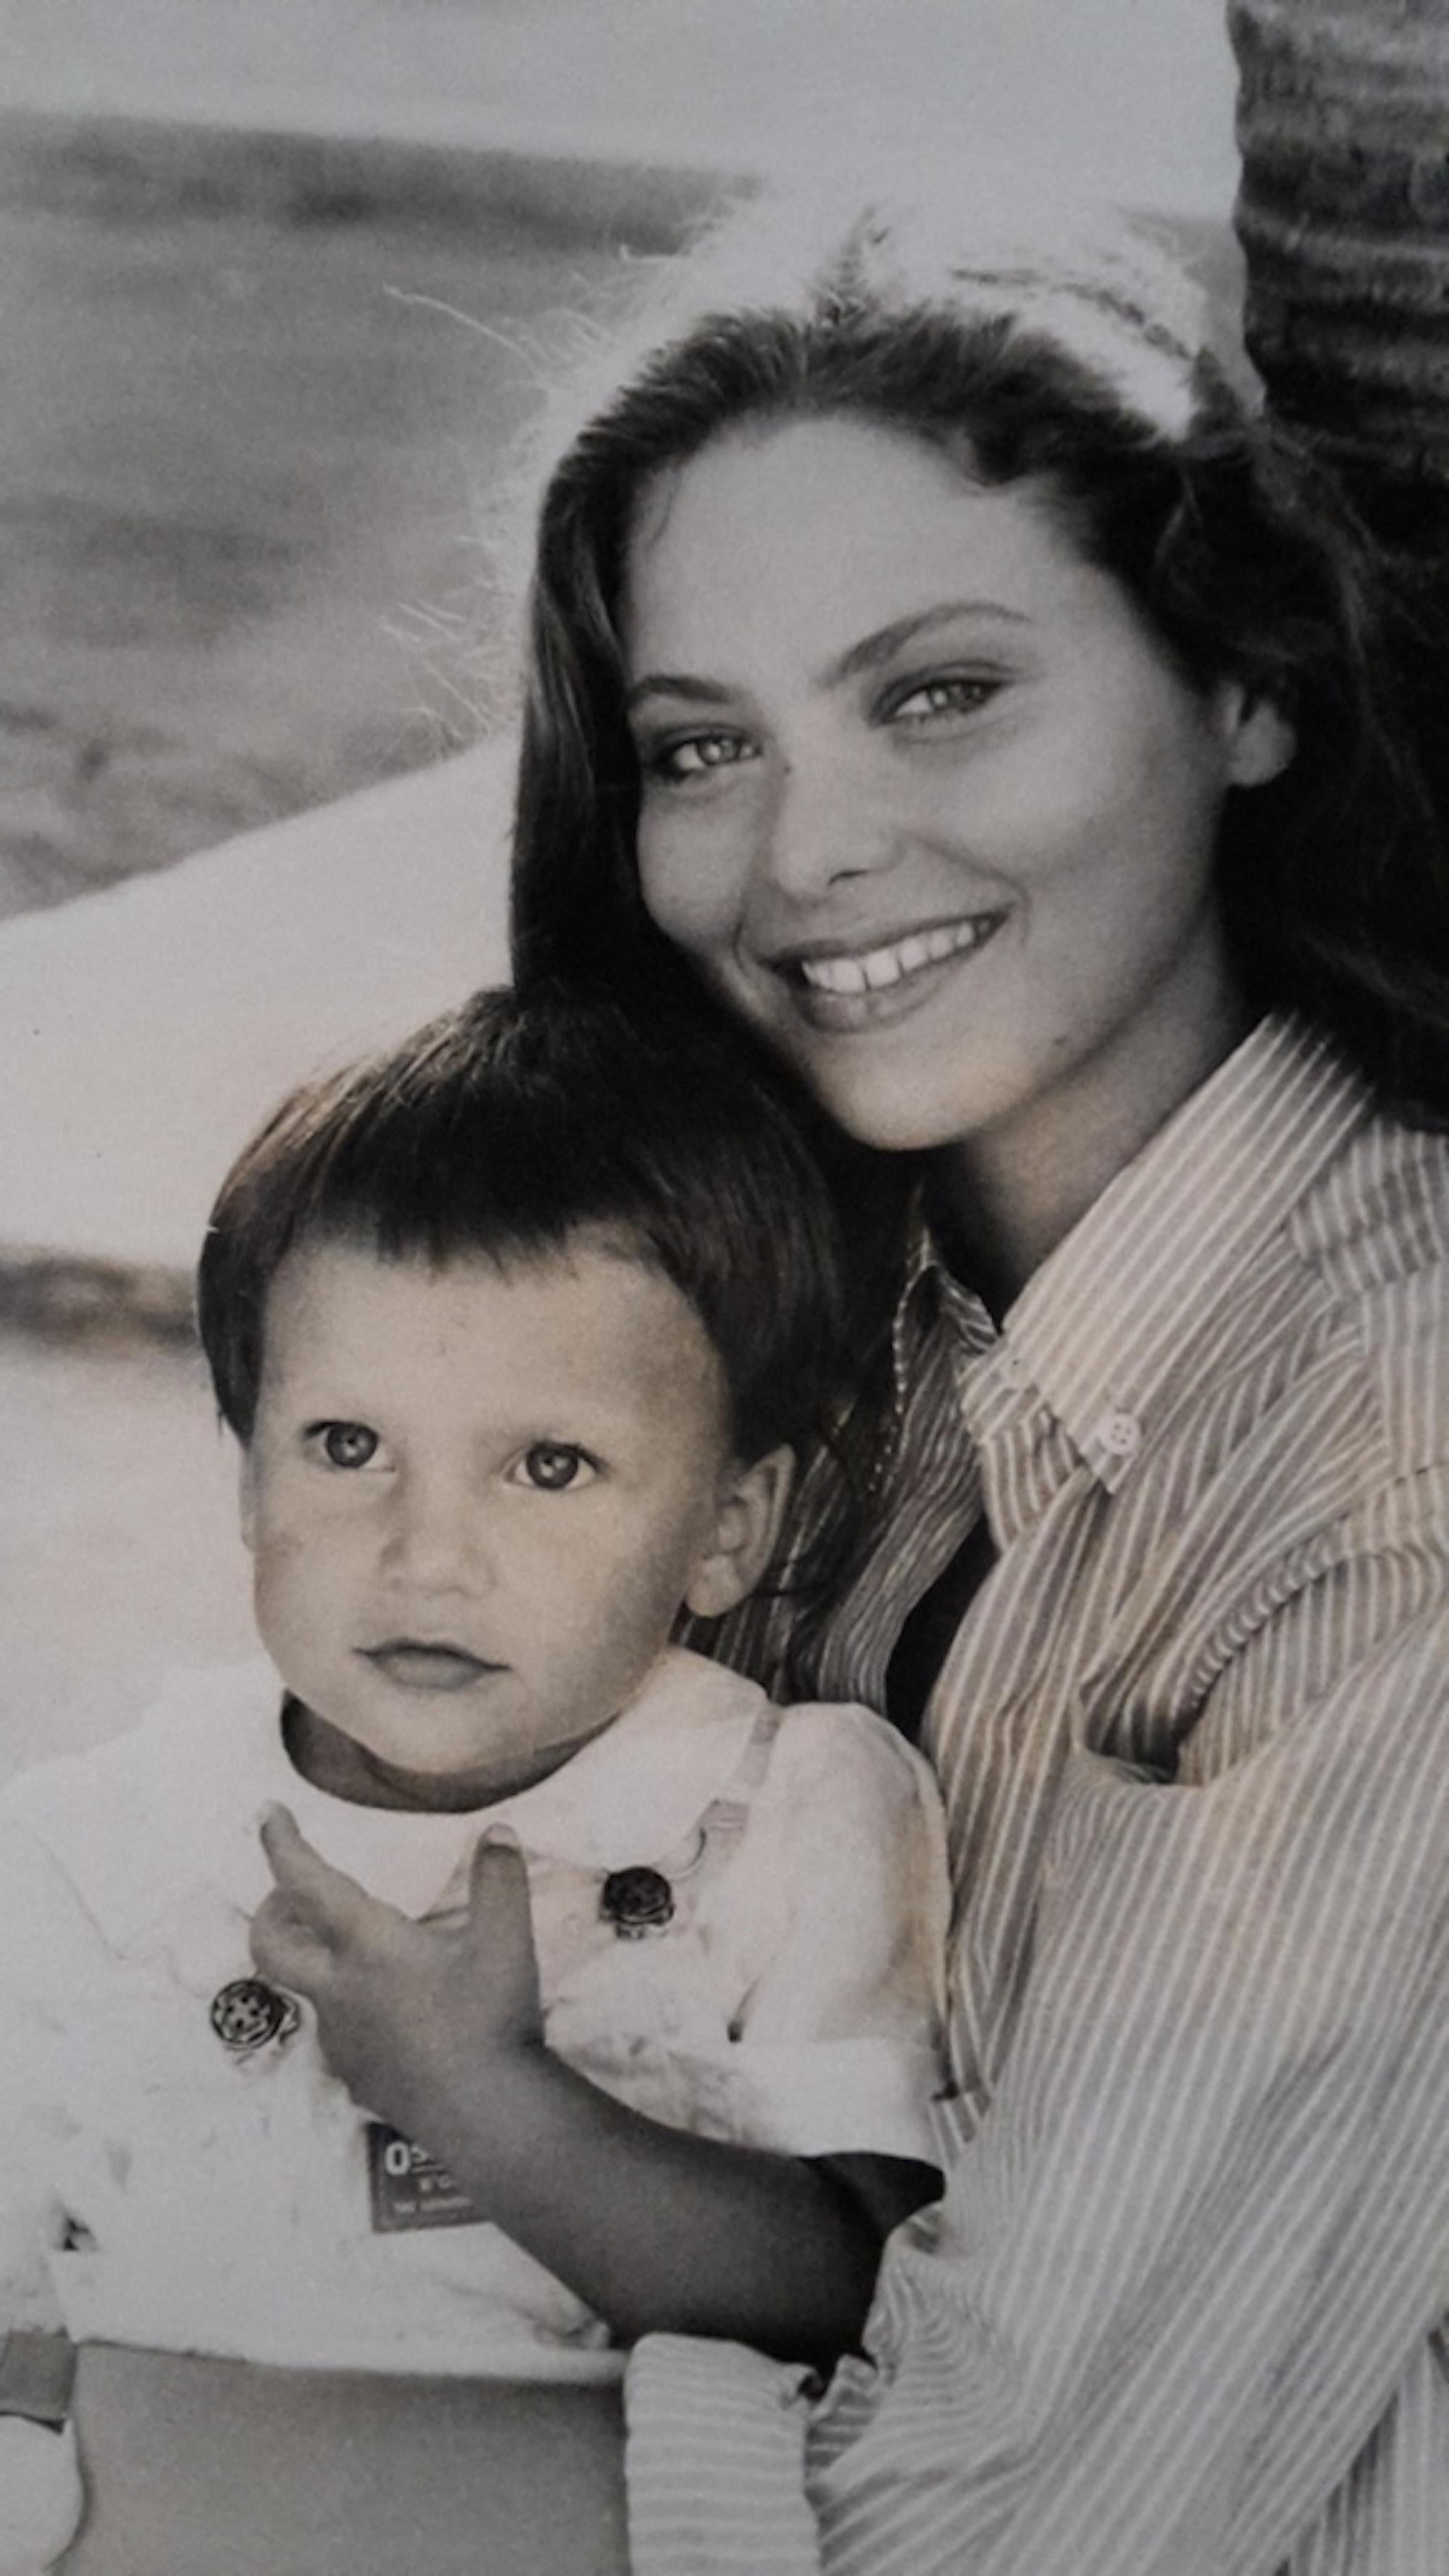 Unknown Portrait Photograph - The Italian Actress Ornella Muti with her son - Vintage Photograph - 1980s